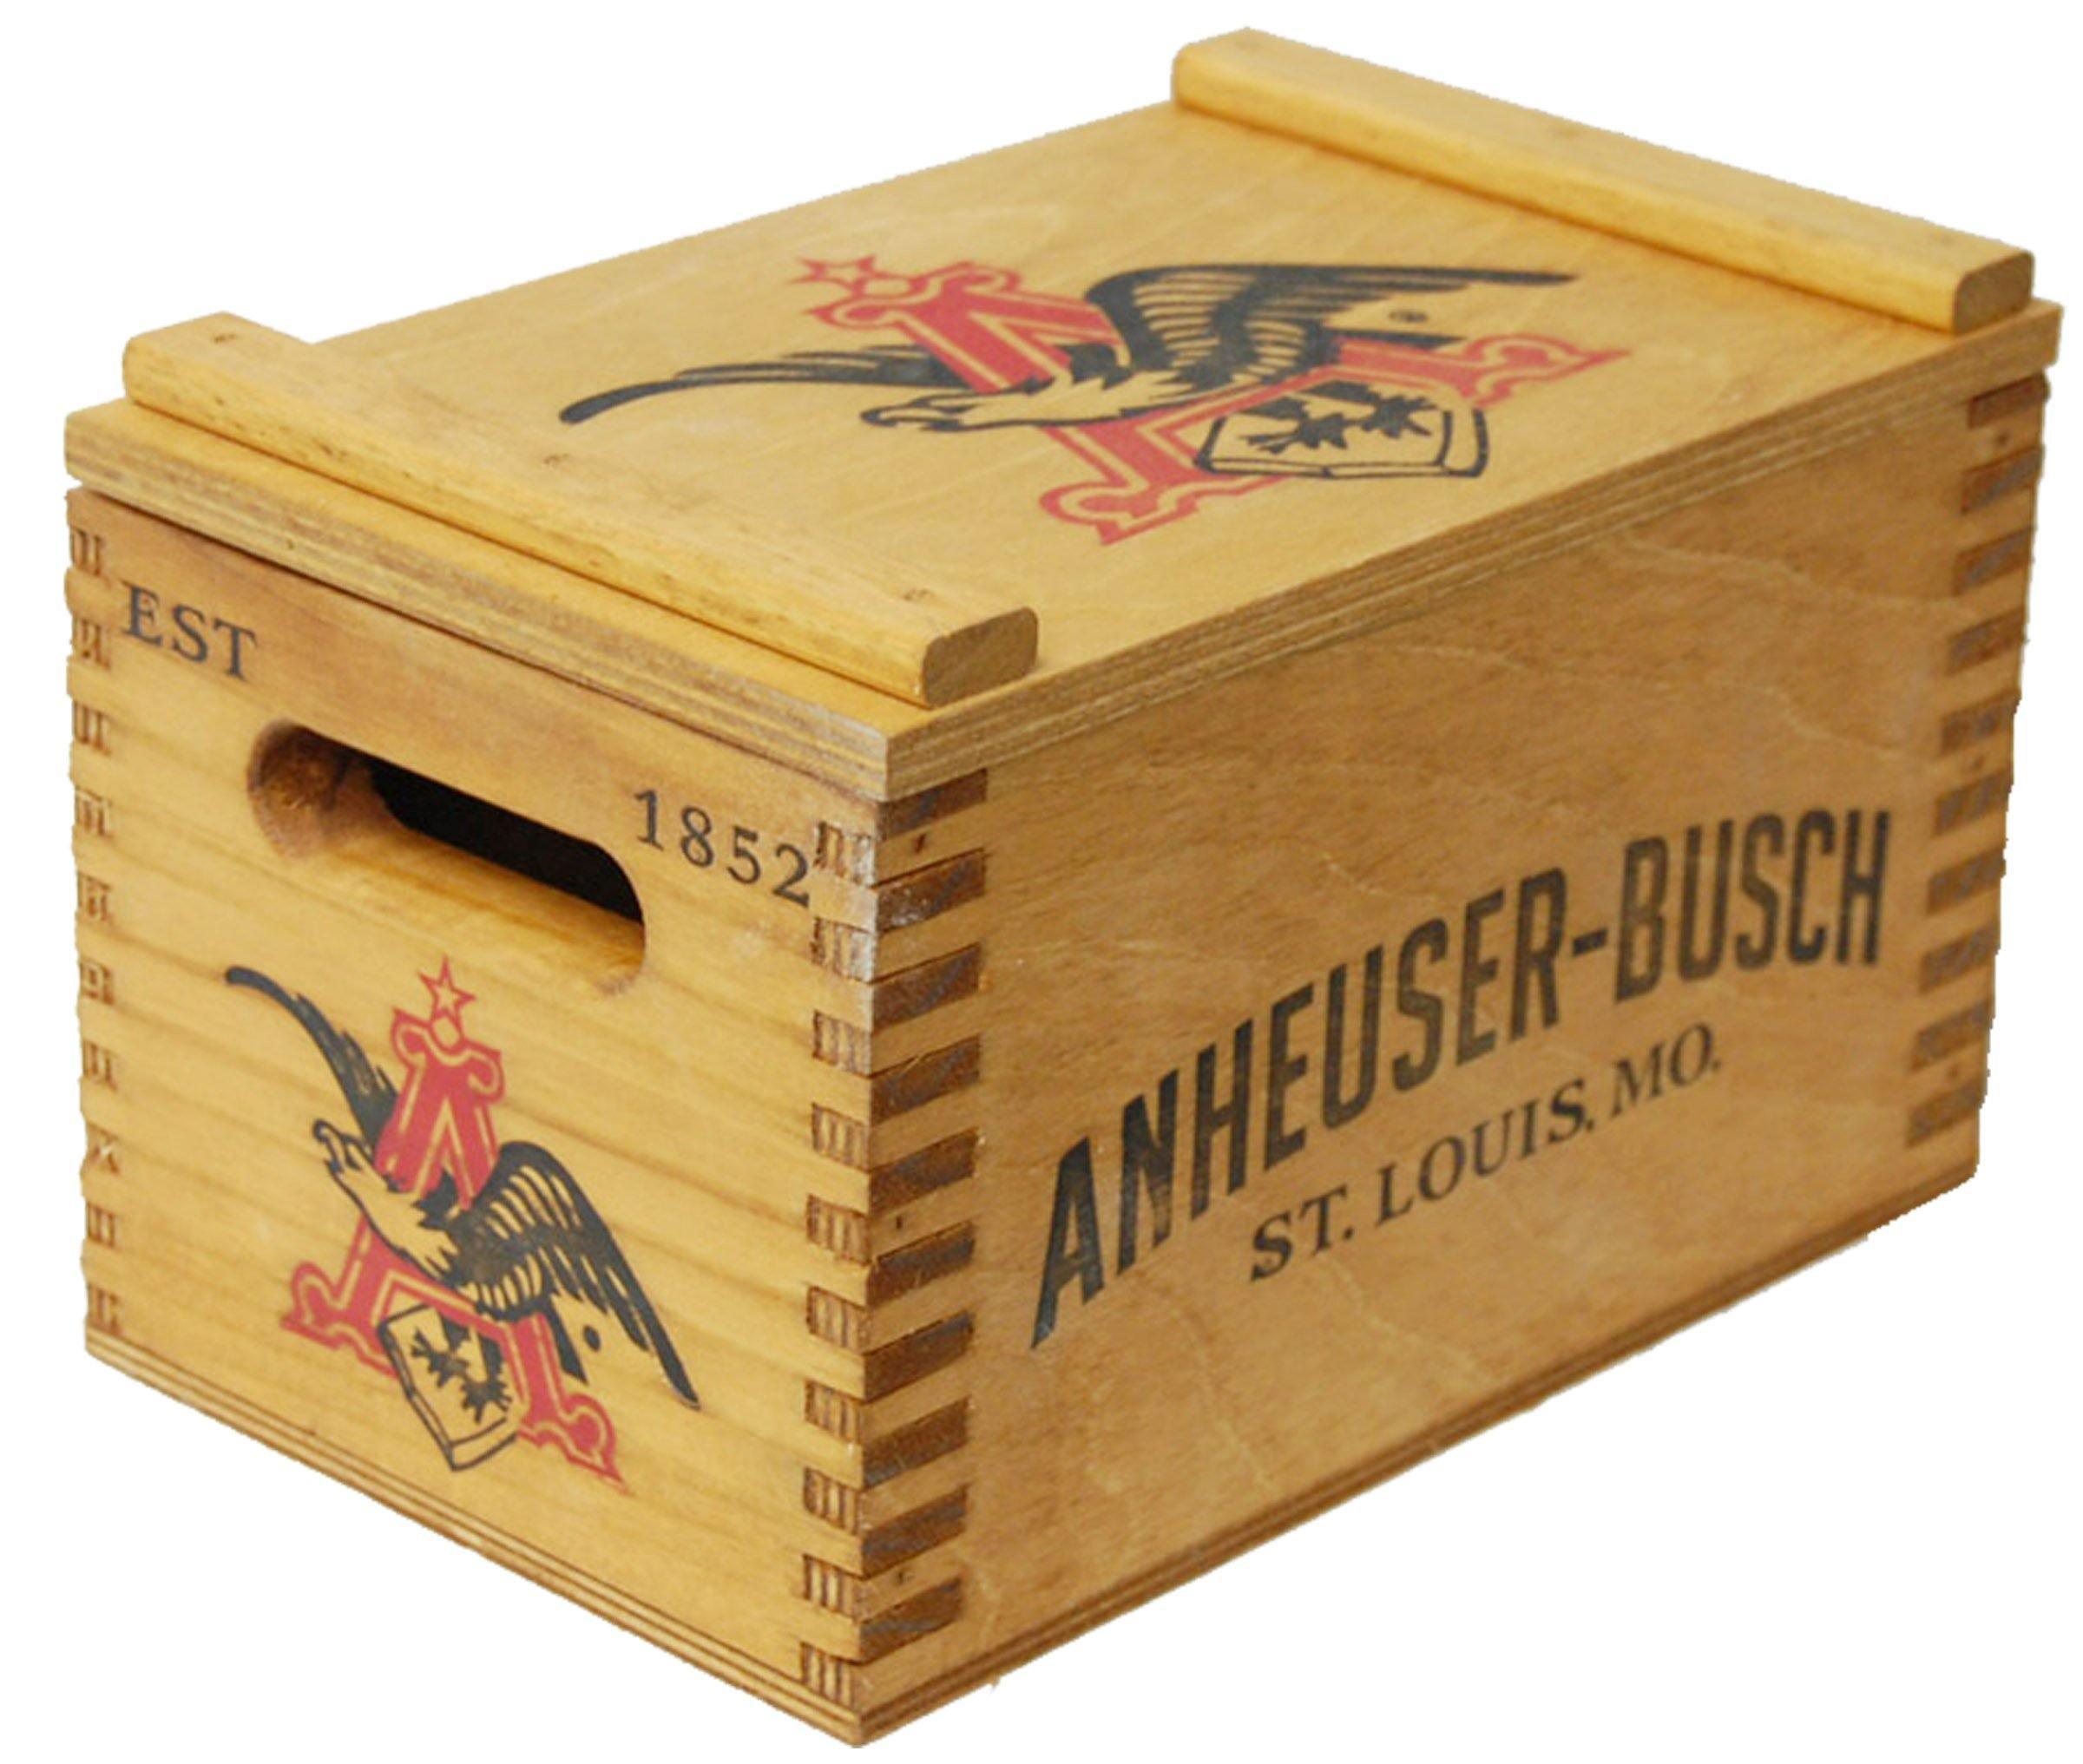 Gorgeous, handmade wooden crate of beer: Curated by Best of Britsh